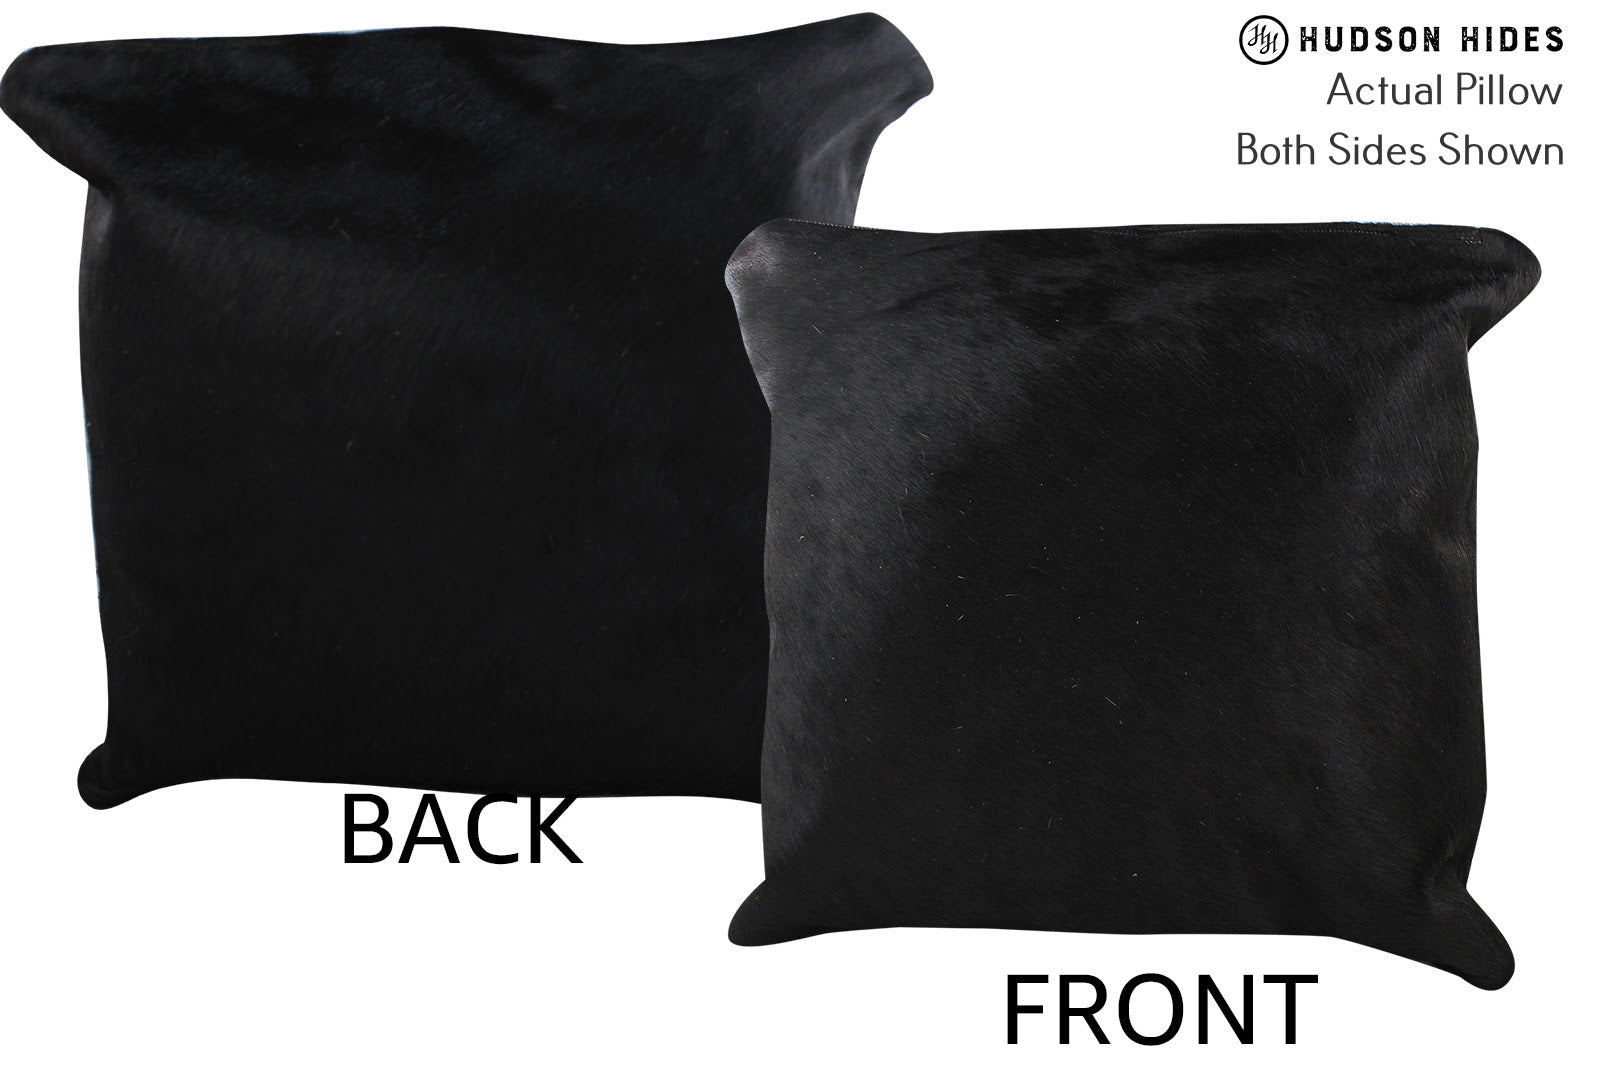 Solid Black Cowhide Pillow #76440